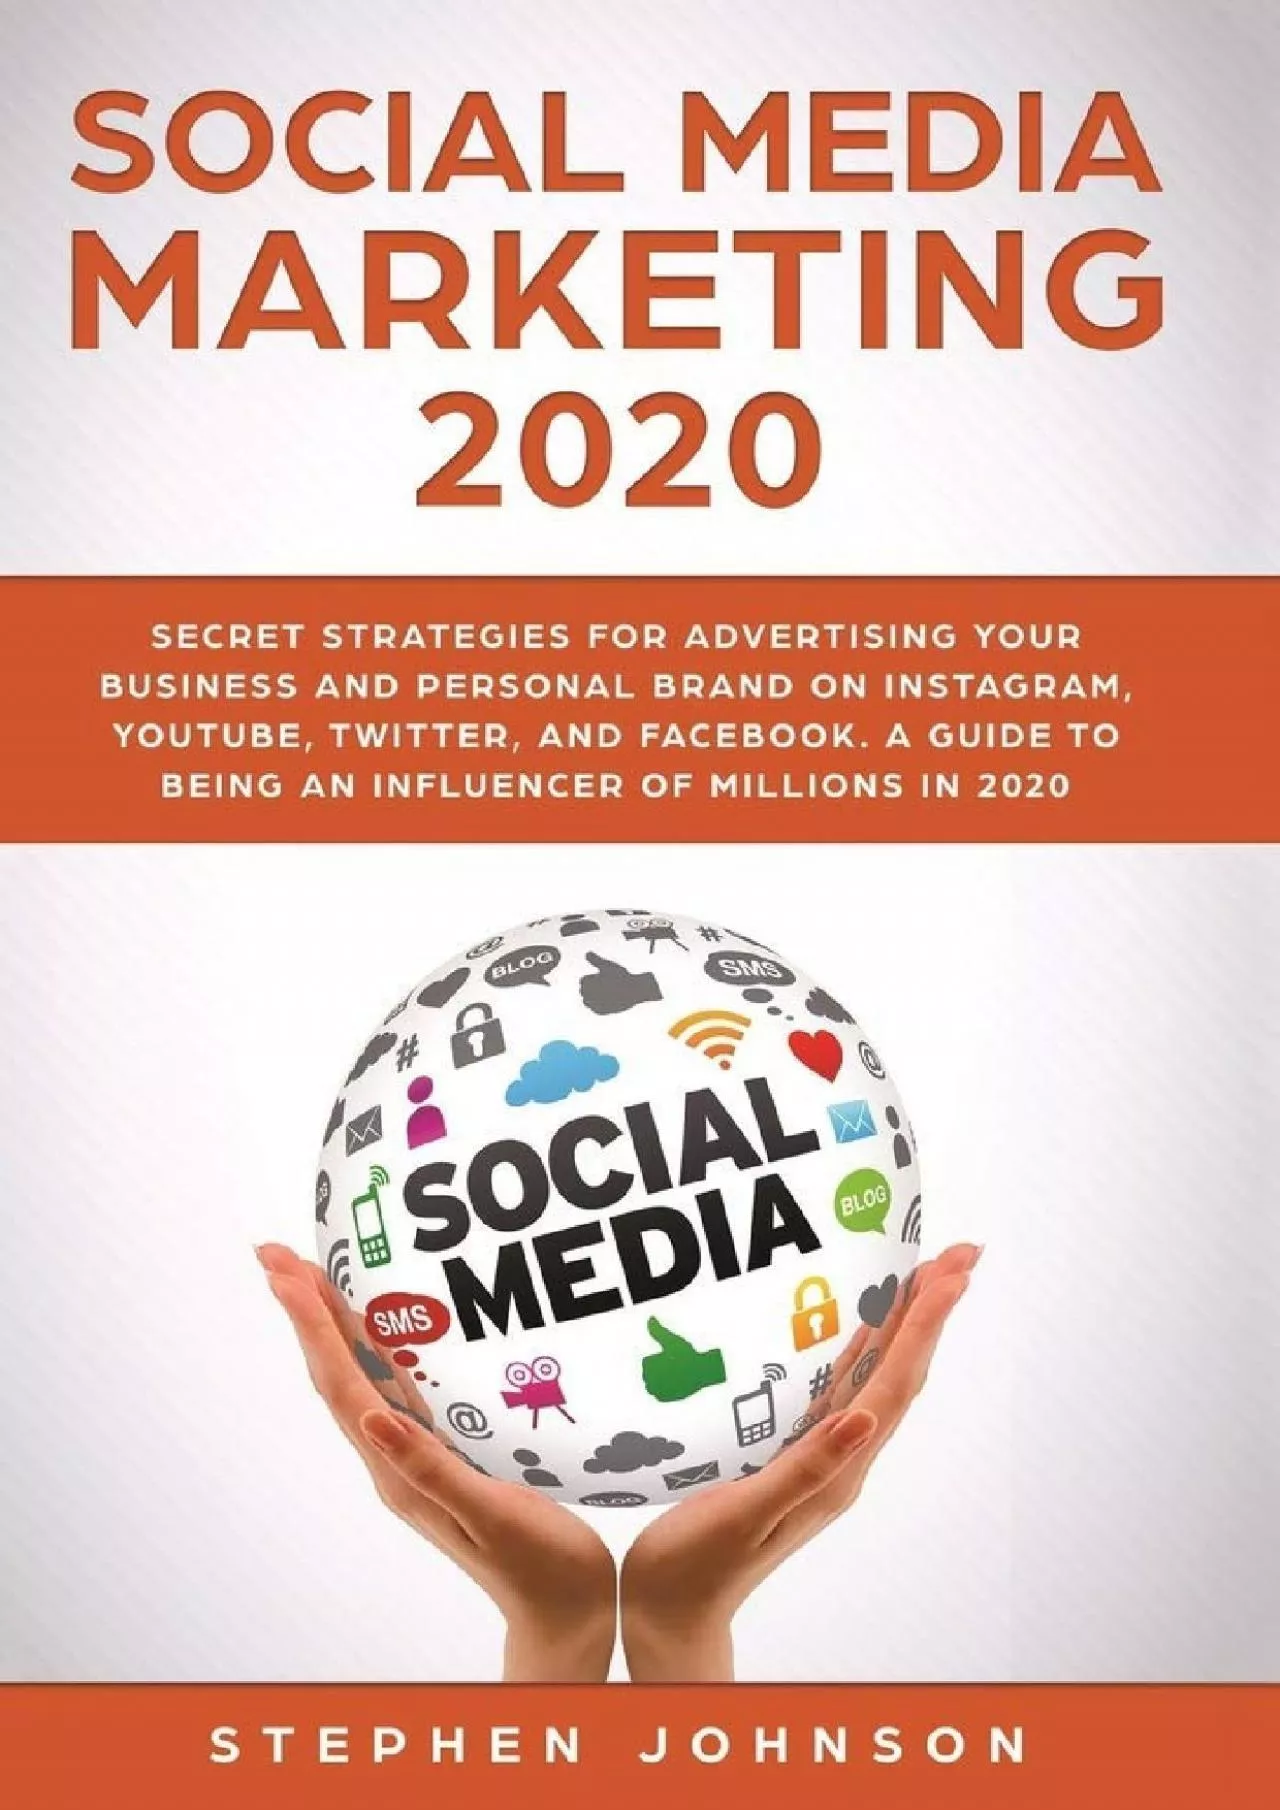 Social Media Marketing 2020: Secret Strategies for Advertising Your Business and Personal